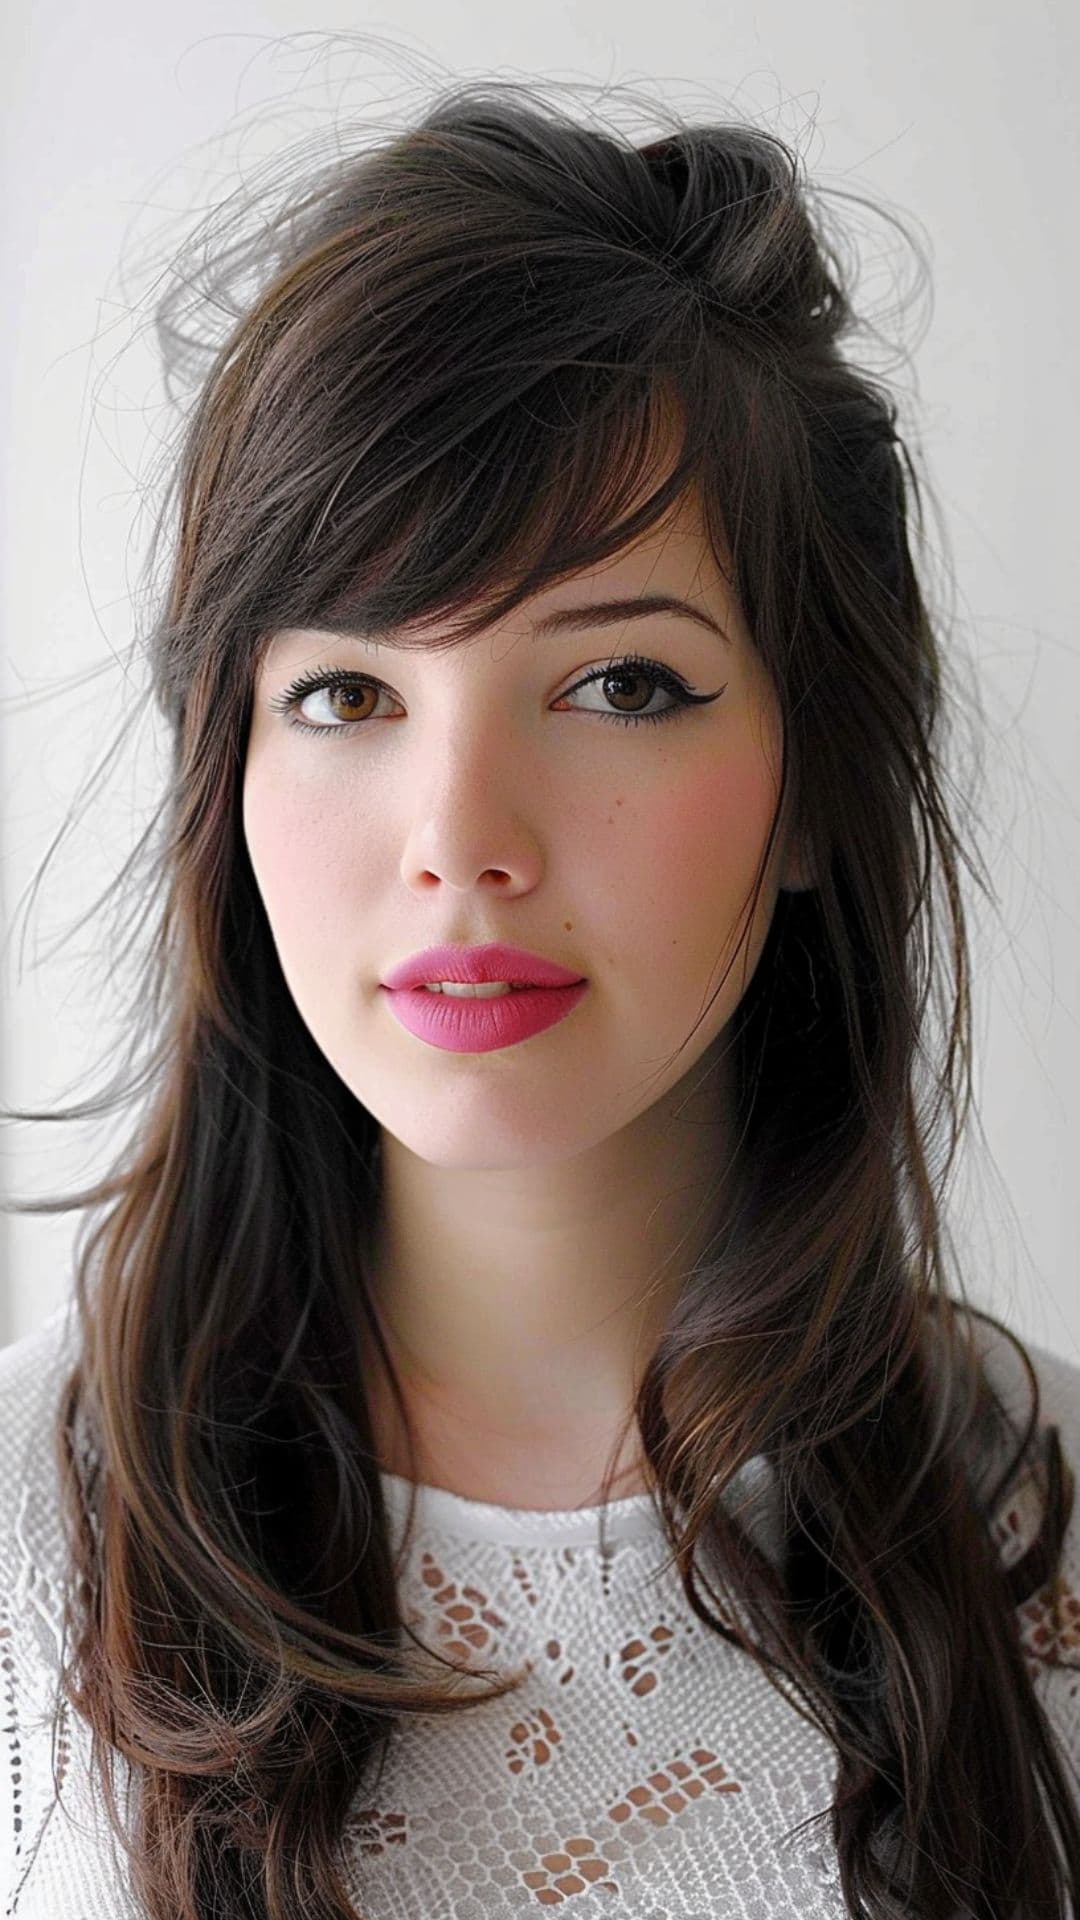 A woman modelling a half-up with side-swept bangs hairstyle.